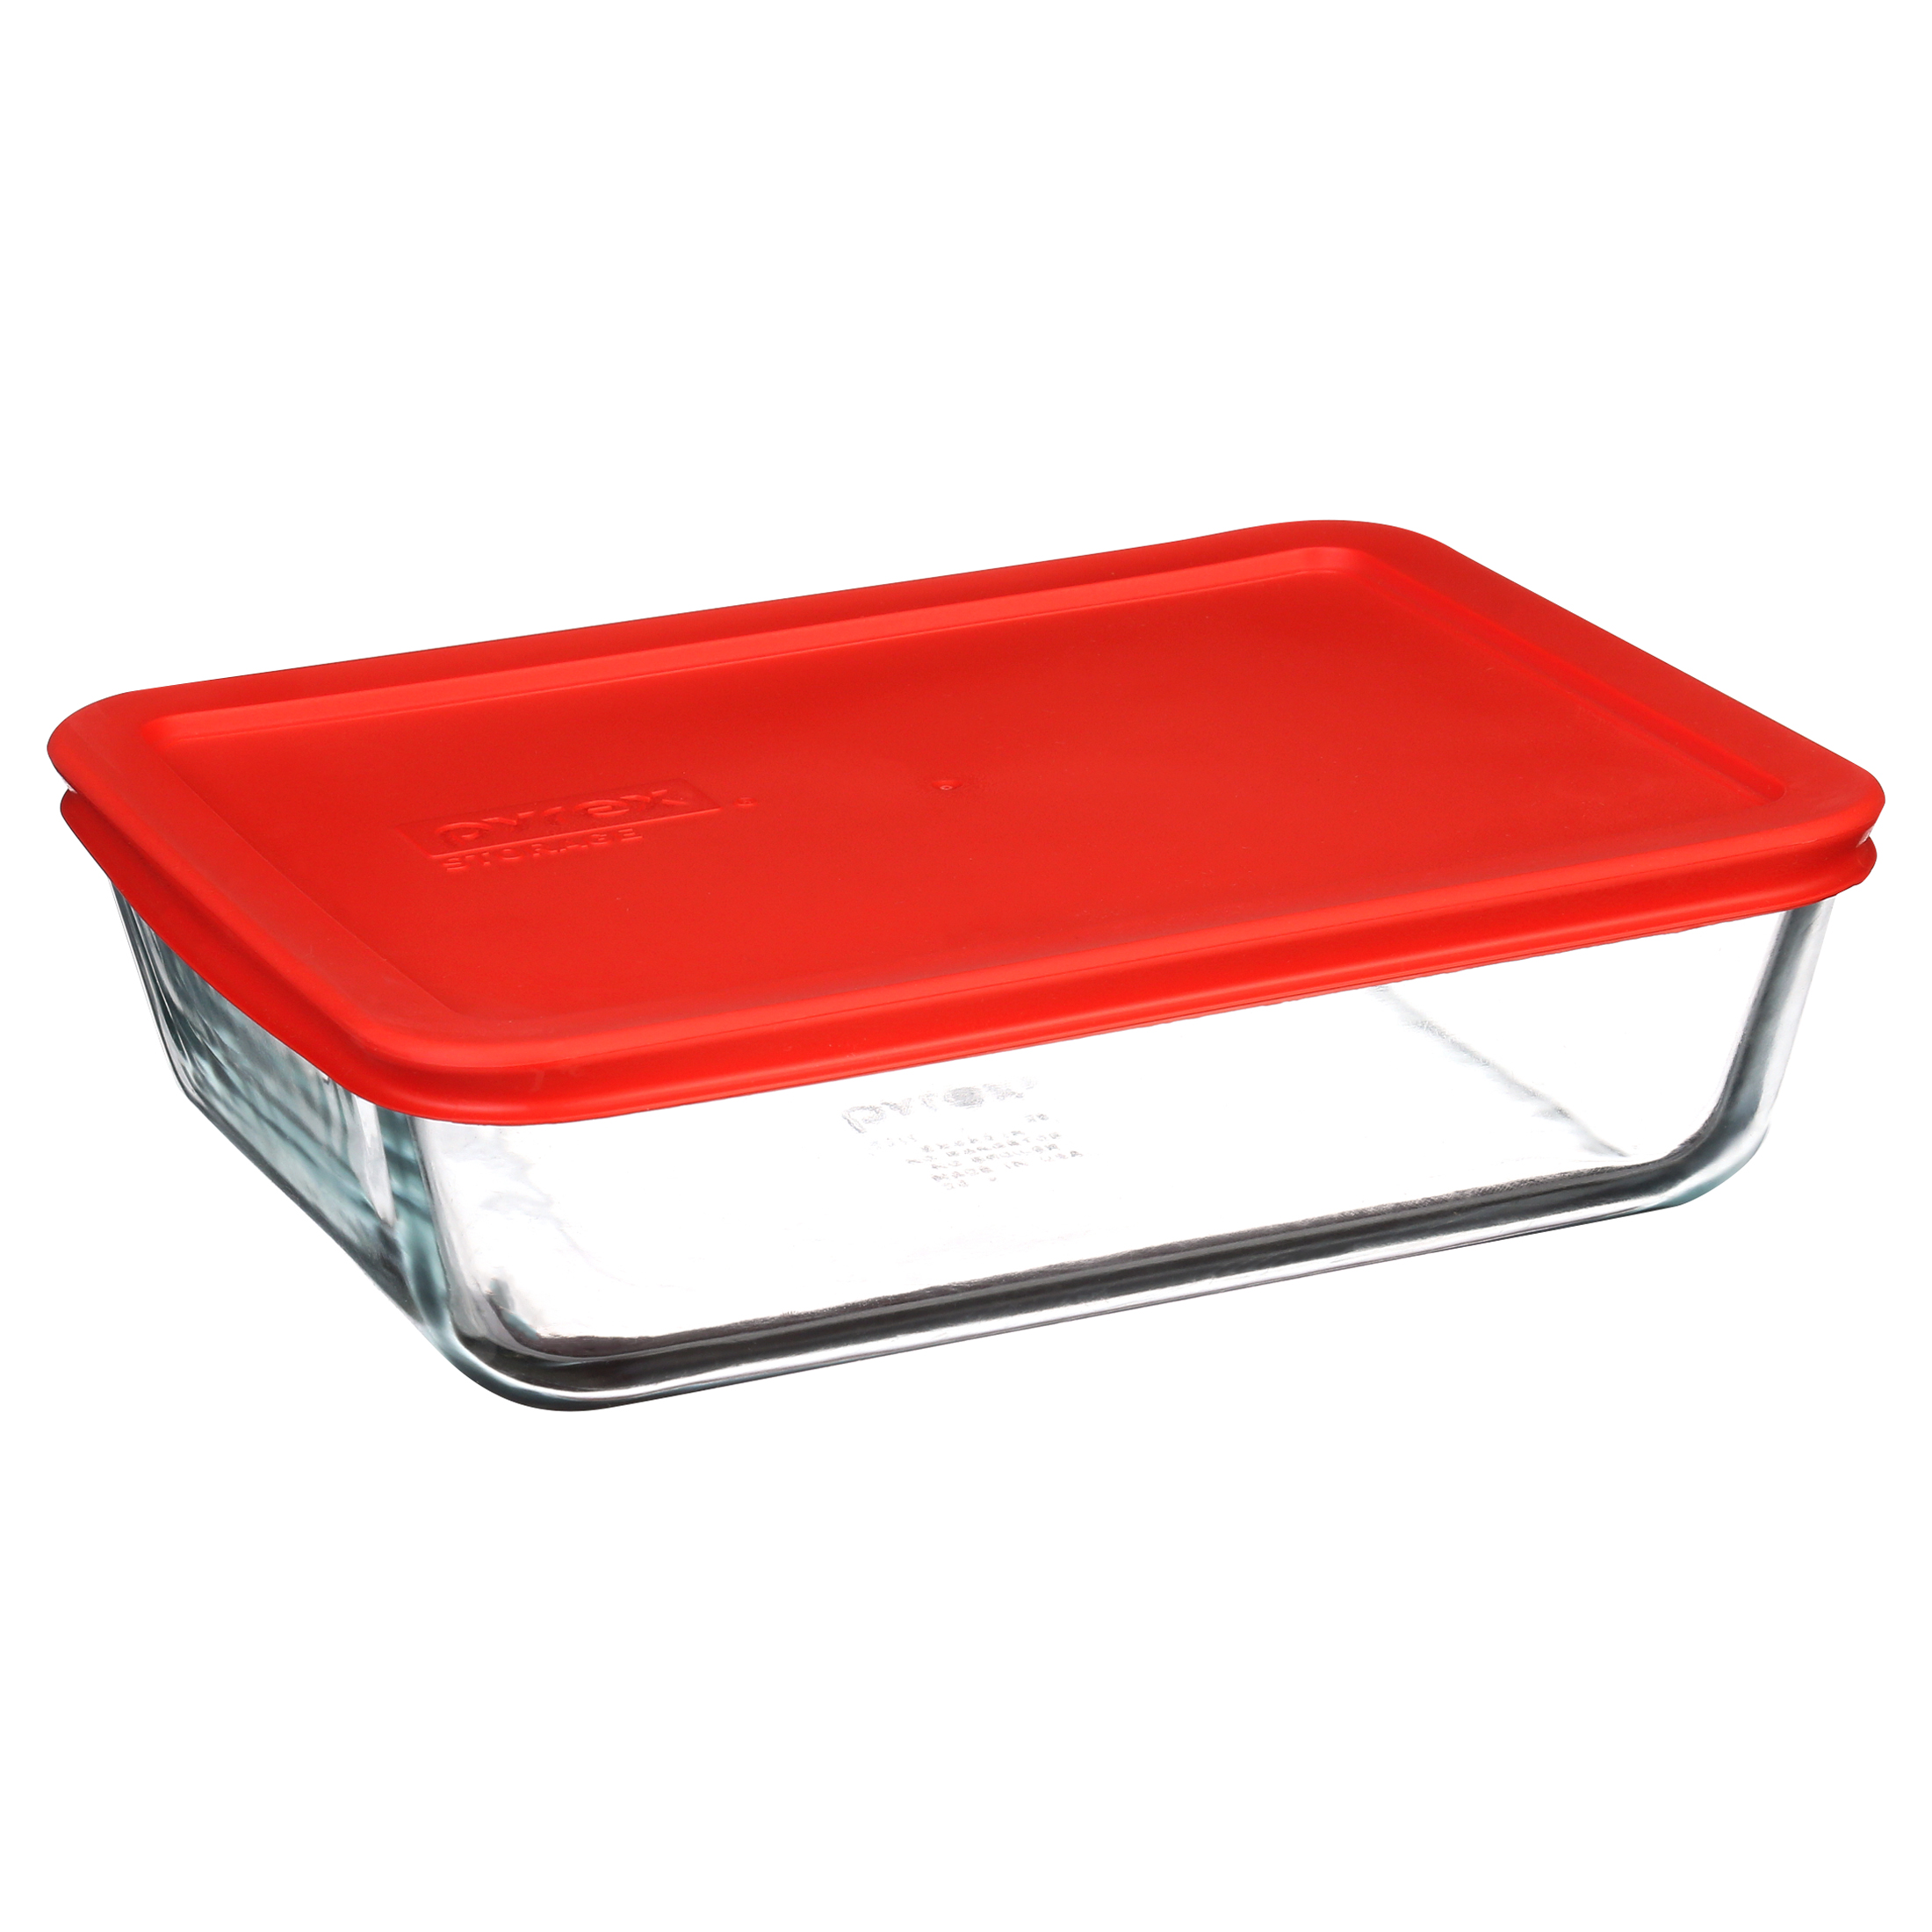 Pyrex® Storage Plus Glass Storage Container, Red, 14 Piece - image 2 of 11